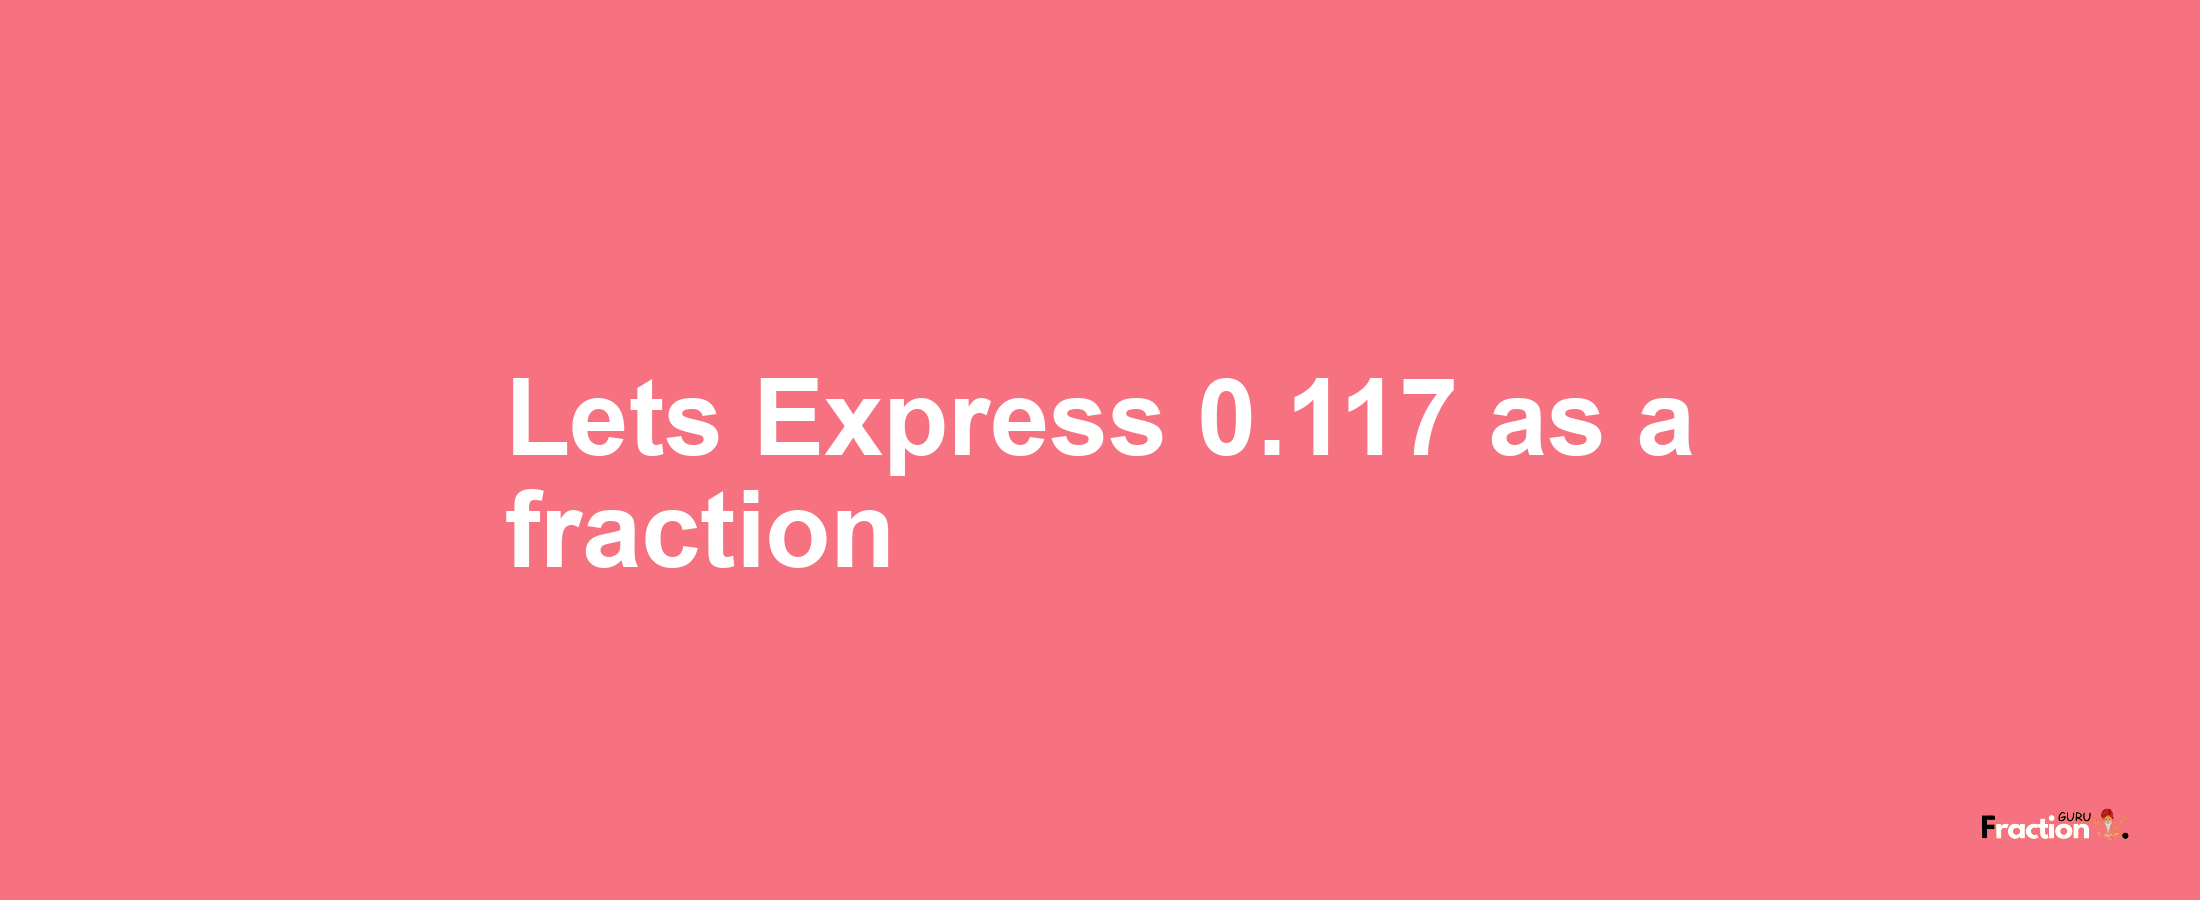 Lets Express 0.117 as afraction